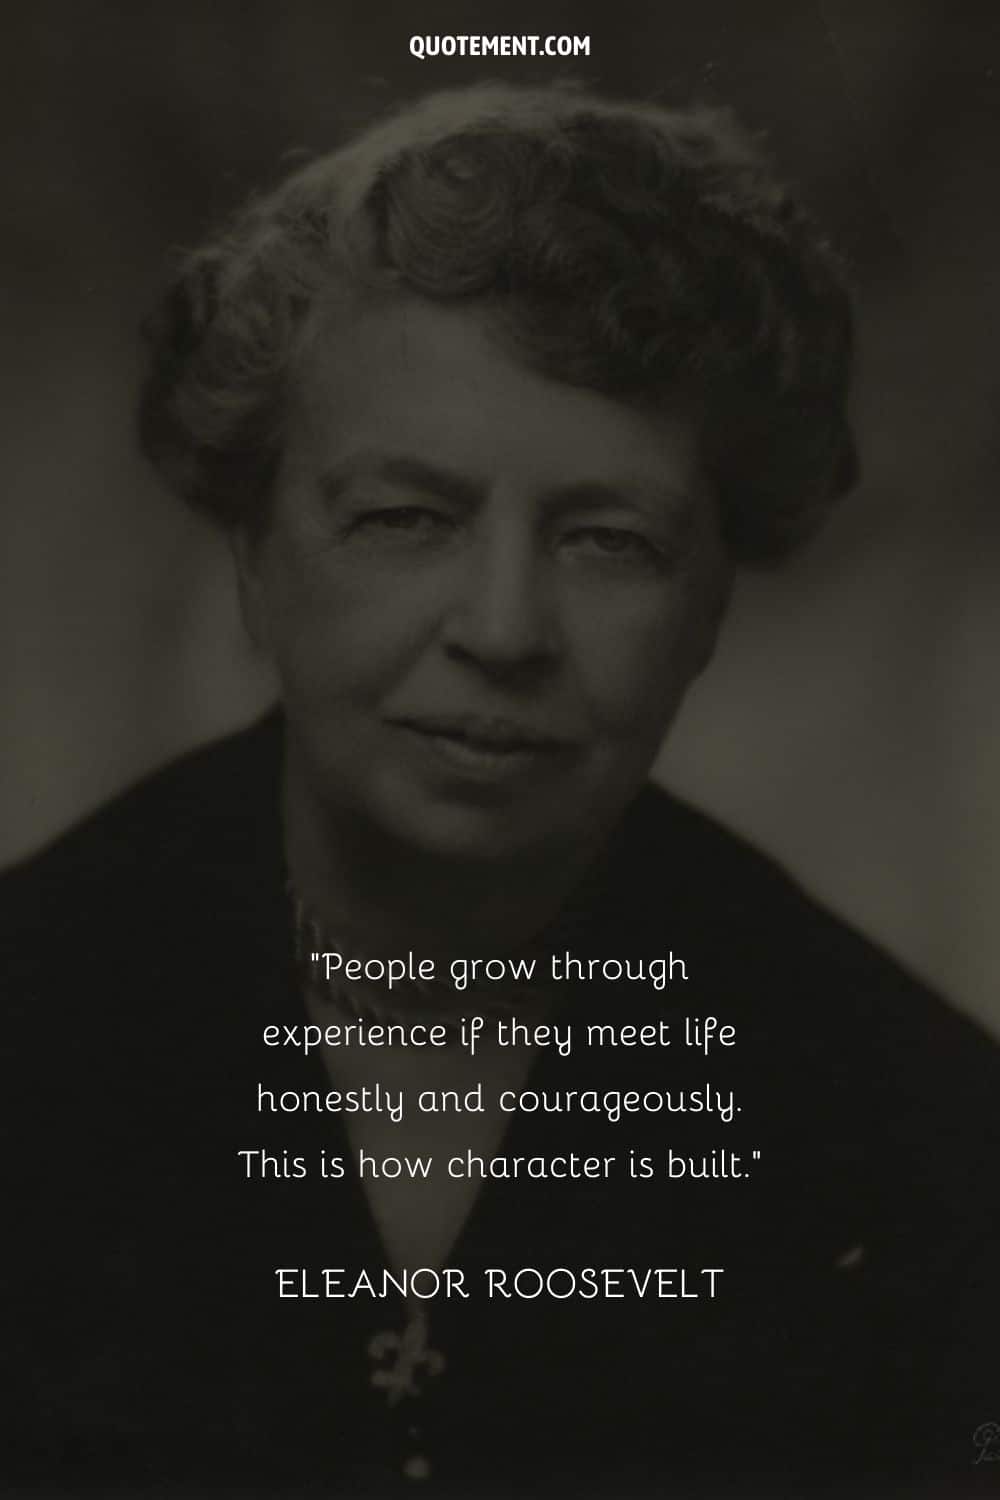 “People grow through experience if they meet life honestly and courageously. This is how character is built.” ― Eleanor Roosevelt